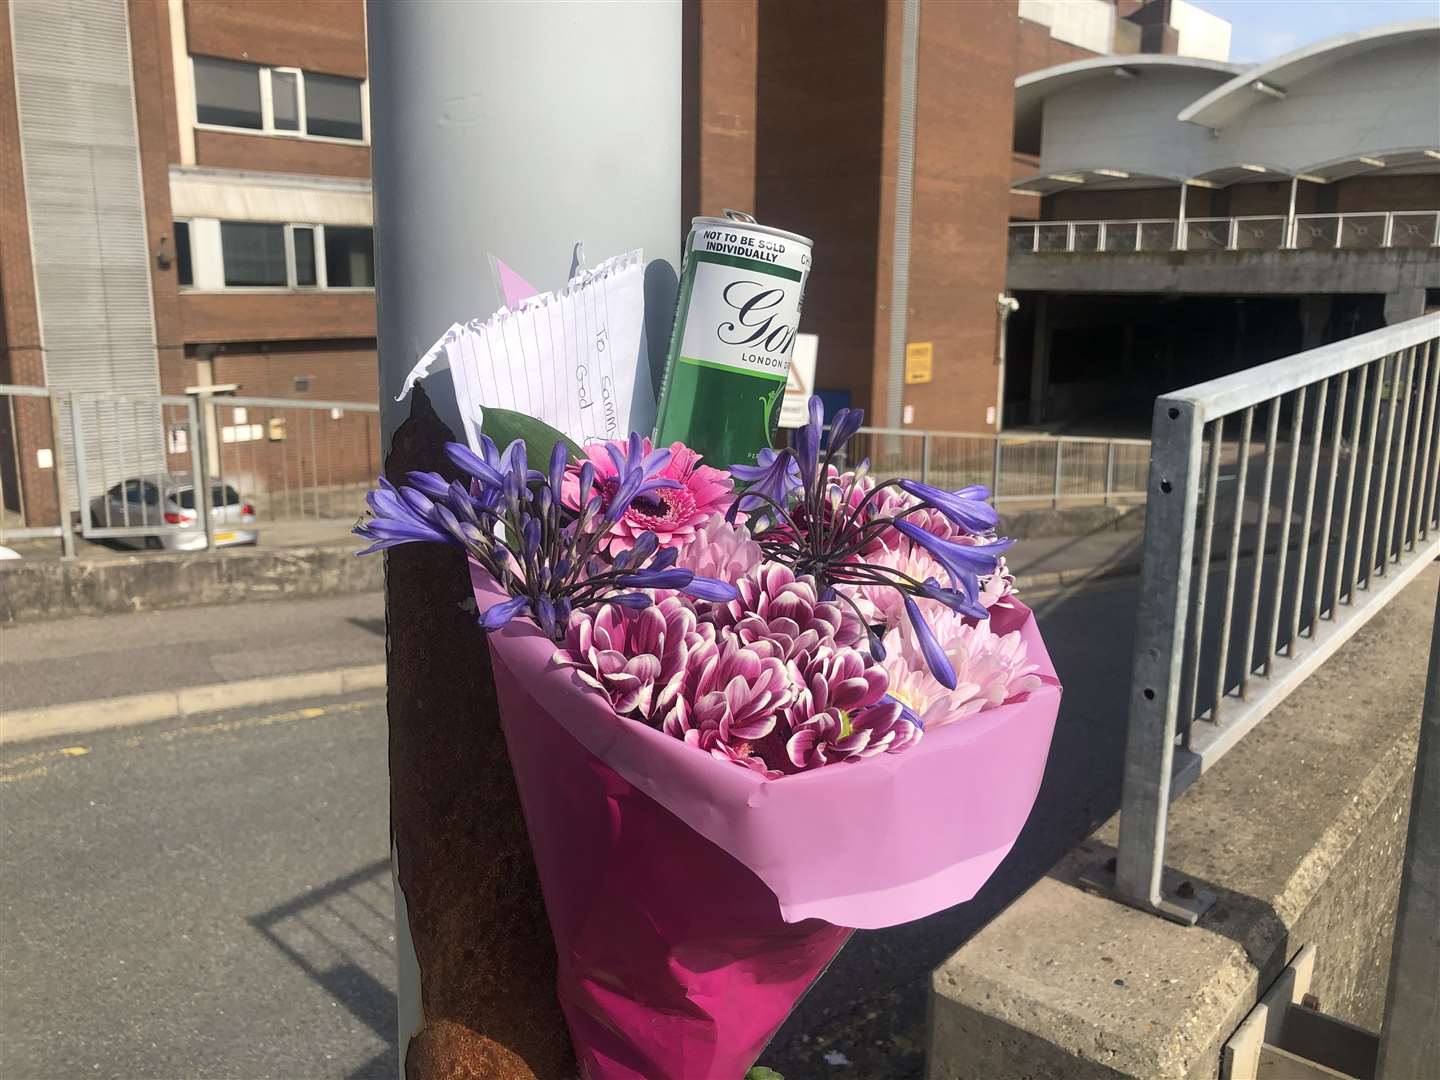 A bouquet of flowers and can of Gordon's gin was left in memory of Sammy Draper (13924466)